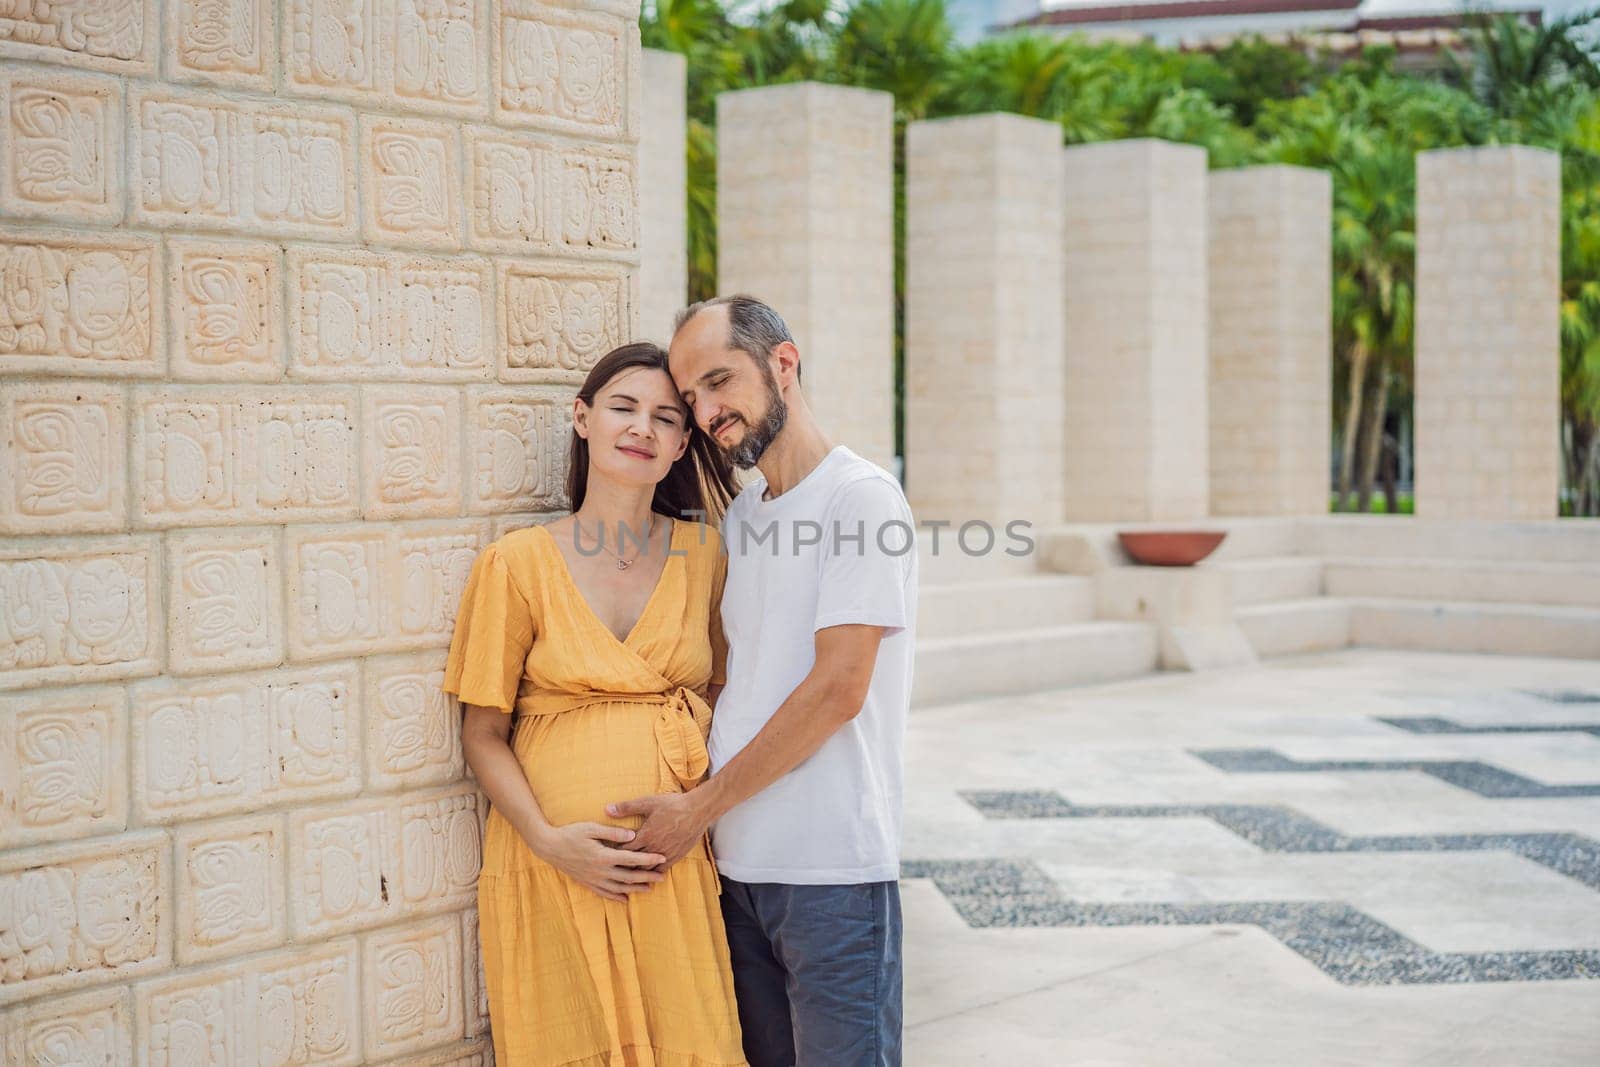 A loving couple in their 40s cherishing the miracle of childbirth in Mexico, embracing the journey of parenthood with joy and anticipation.